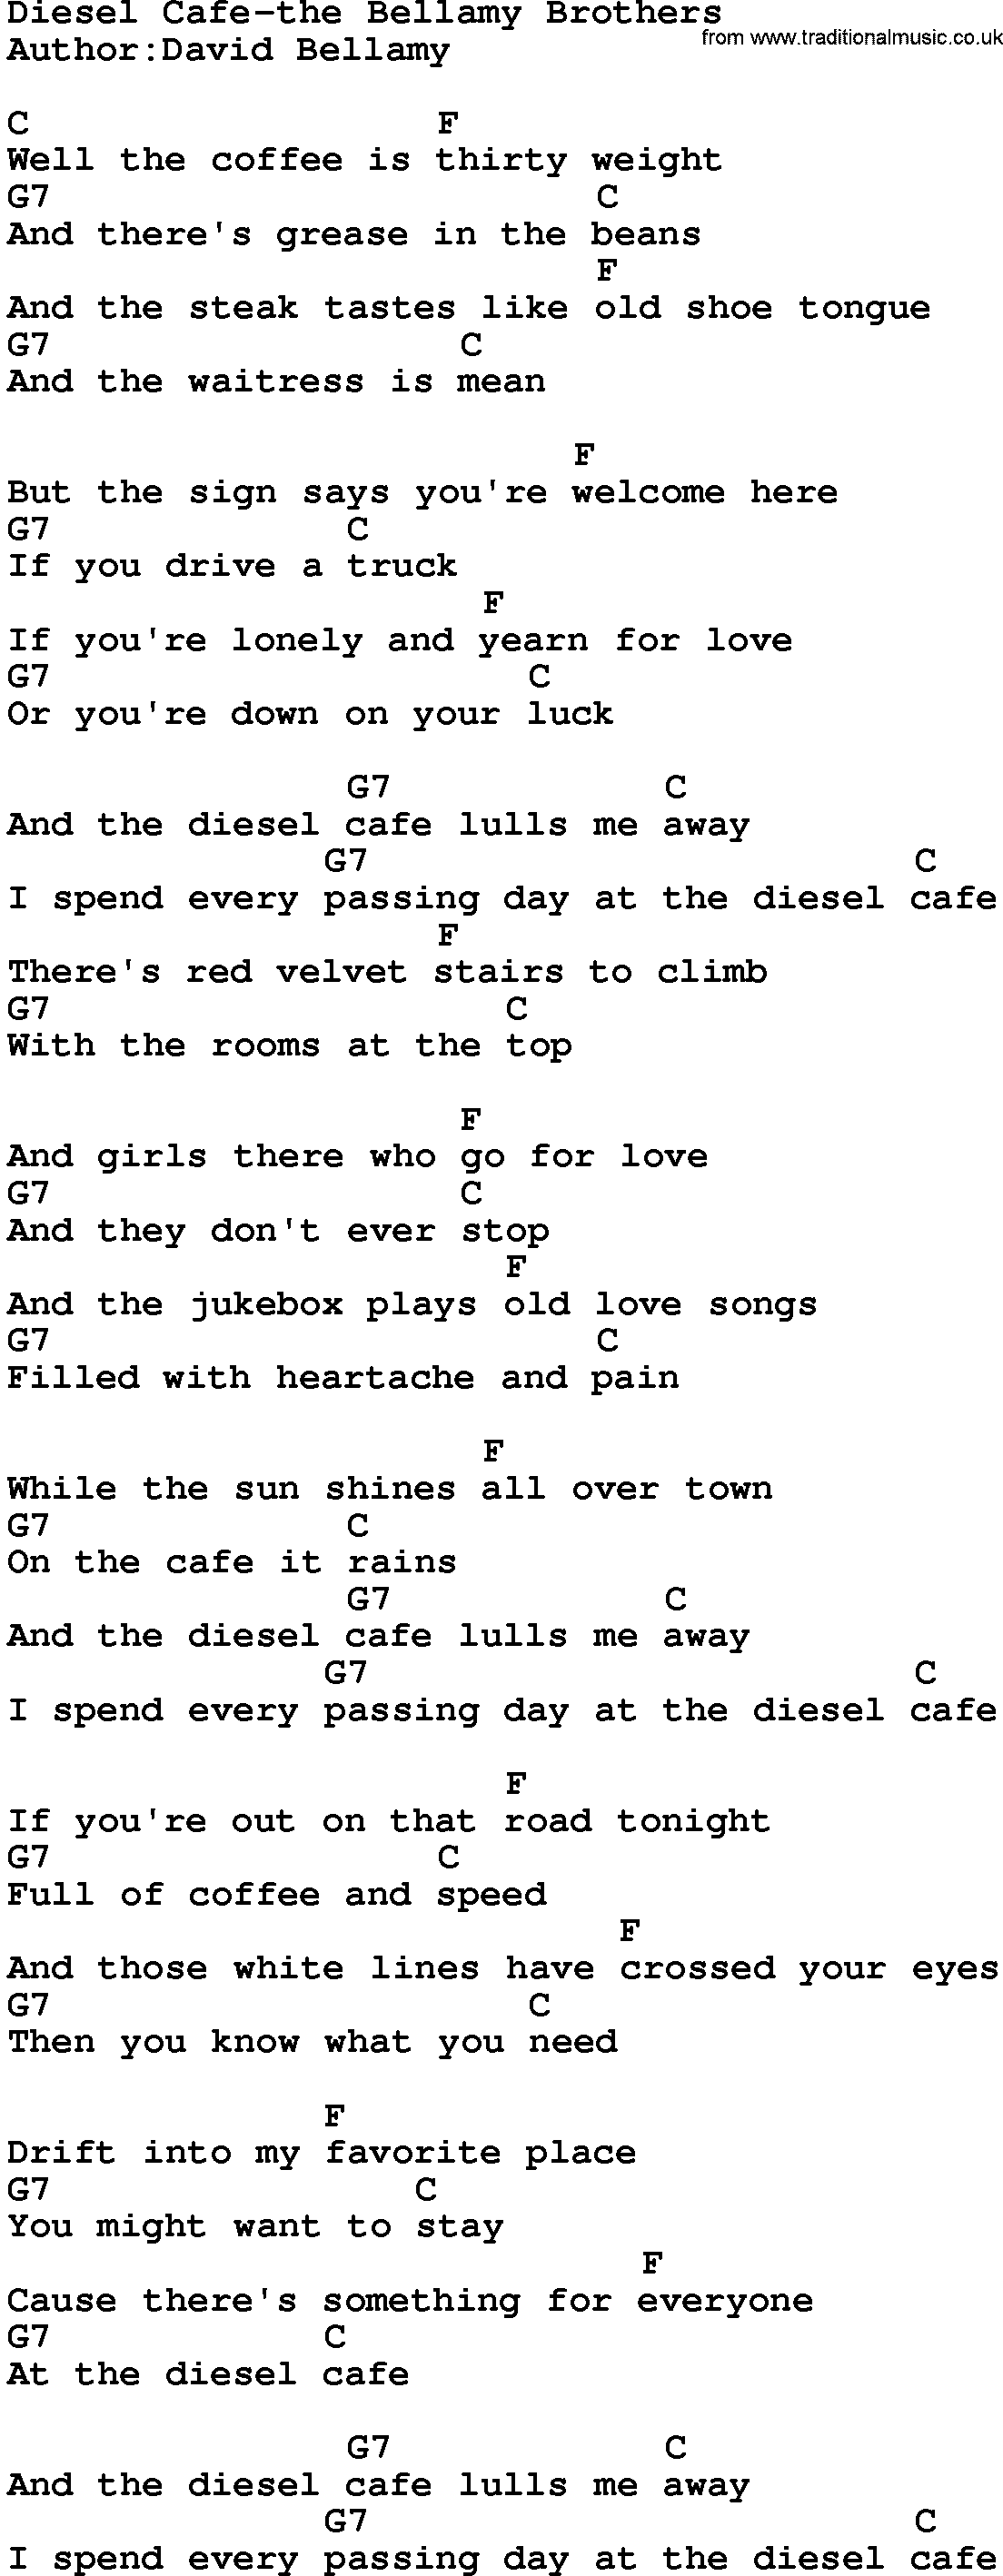 Country music song: Diesel Cafe-The Bellamy Brothers lyrics and chords